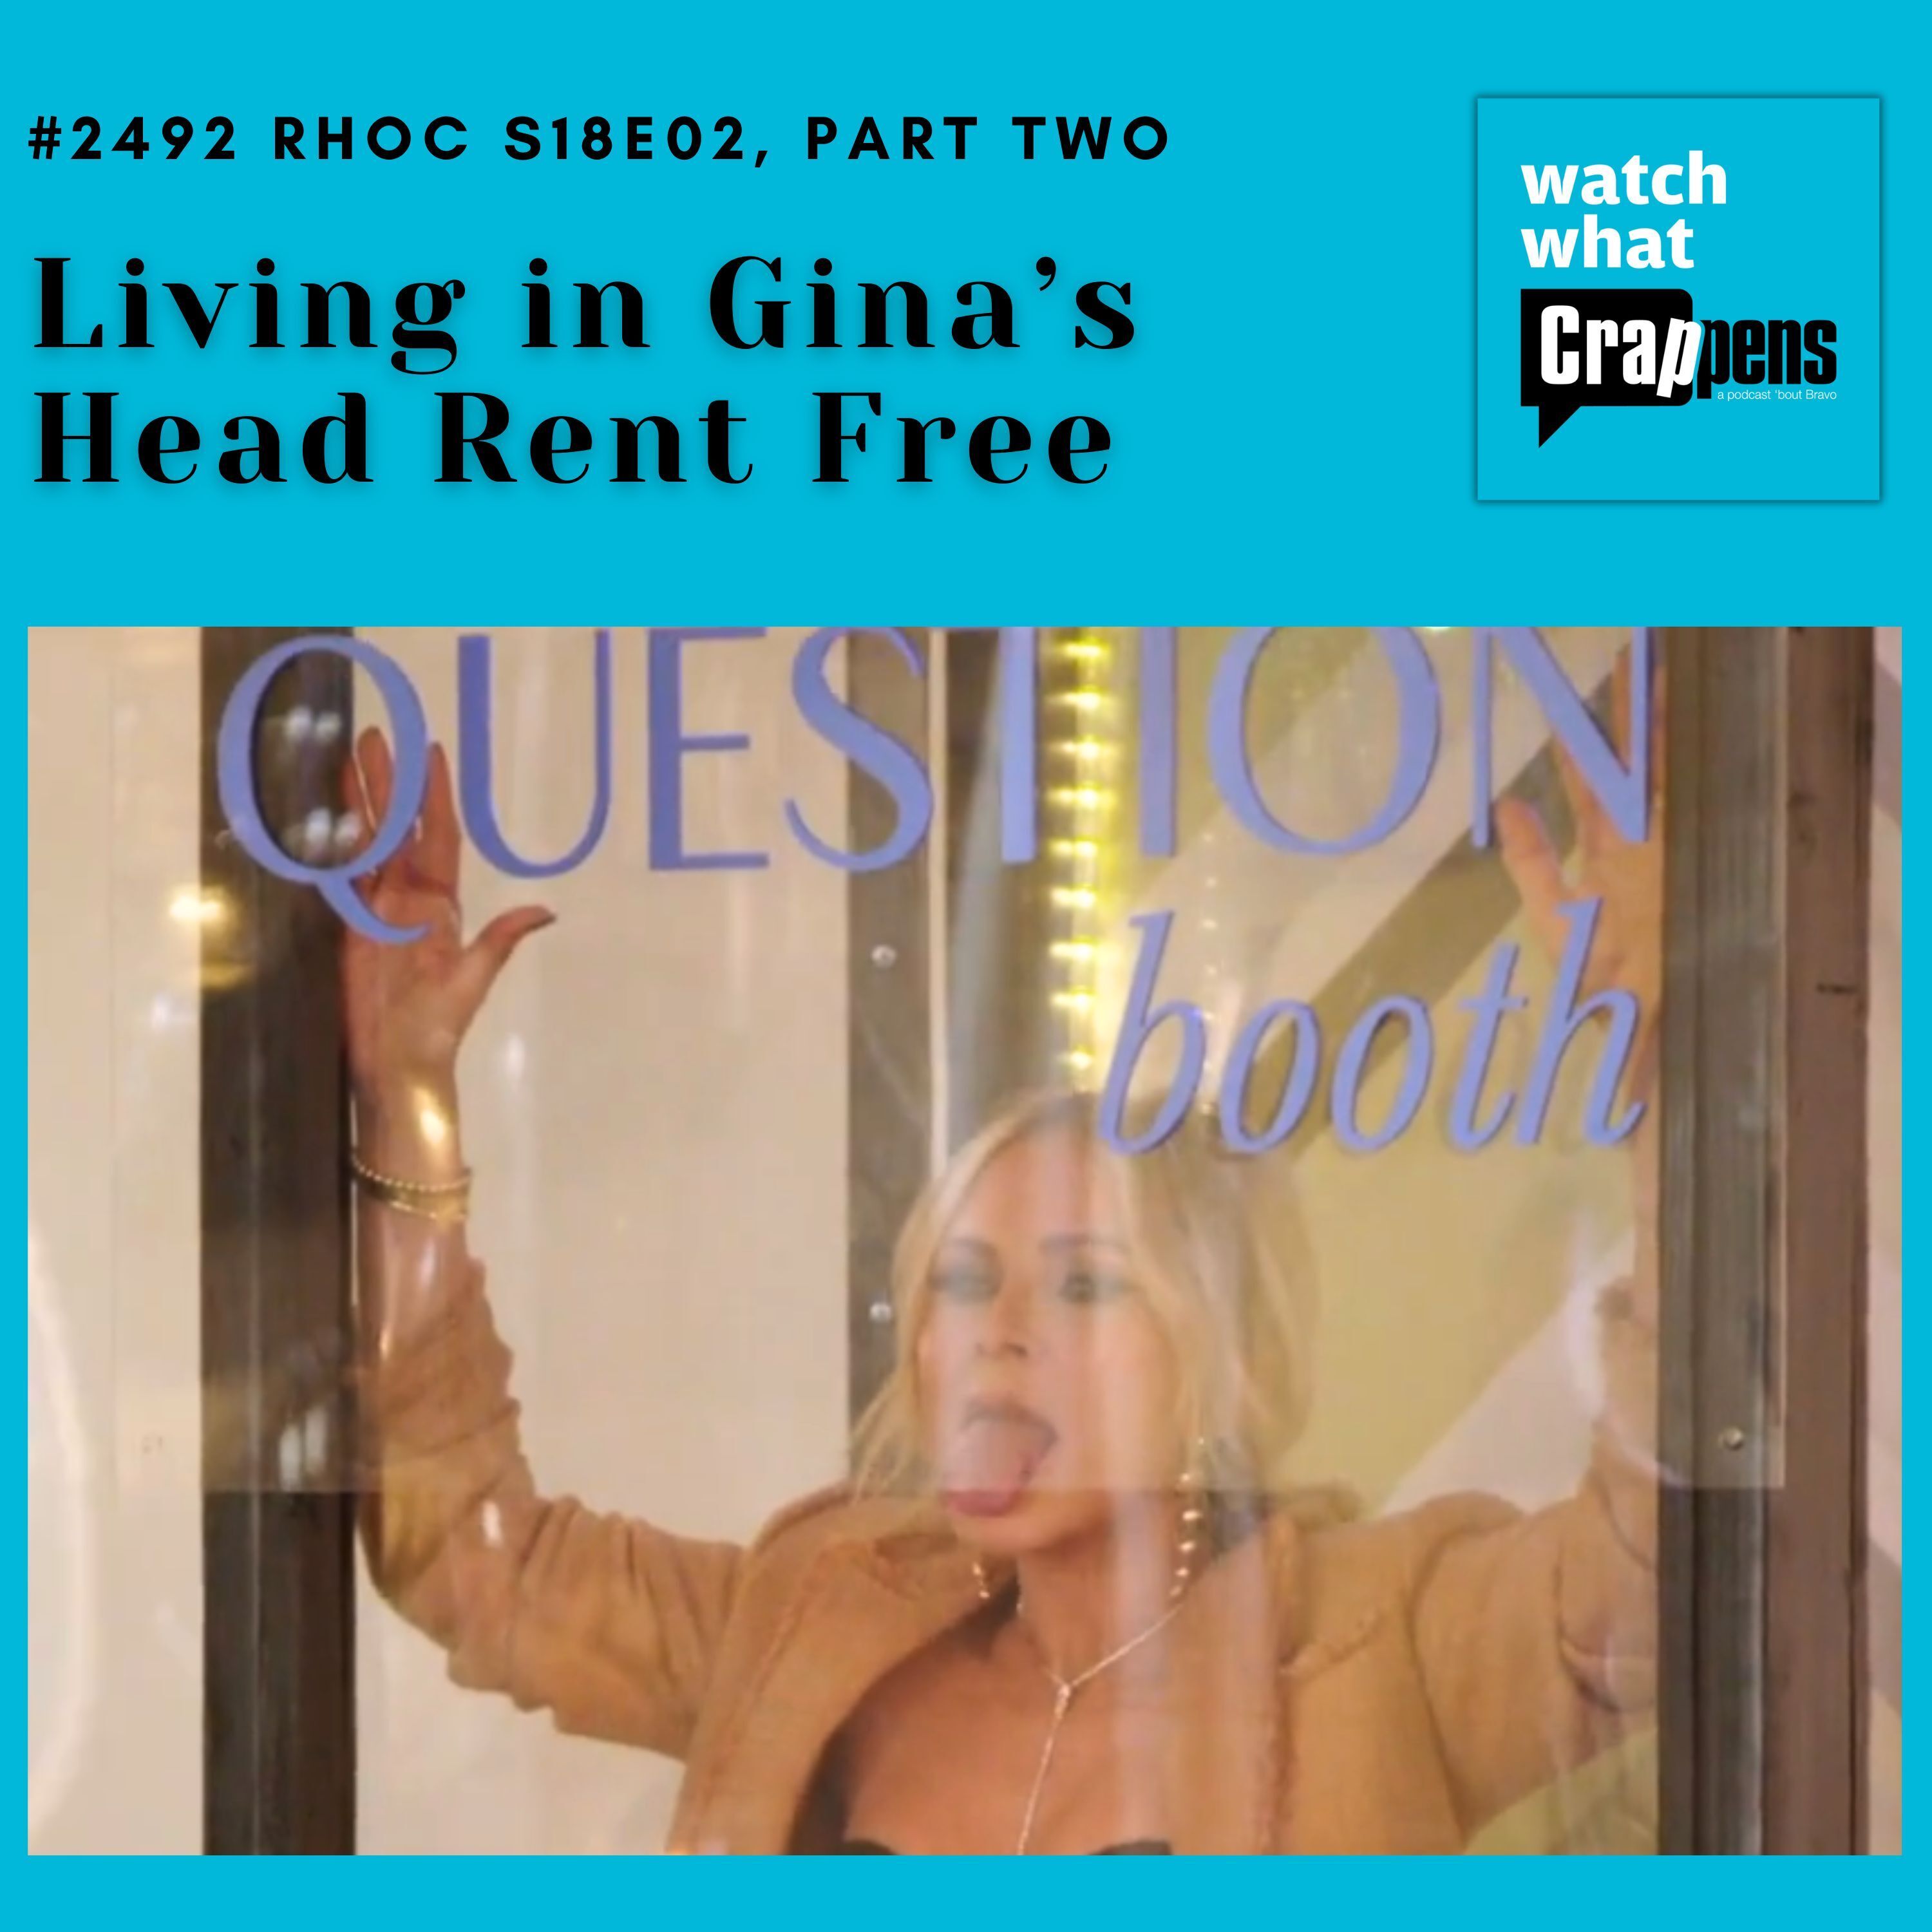 #2492 RHOC S18E02:  Living in Gina’s Head Rent Free, Part 2